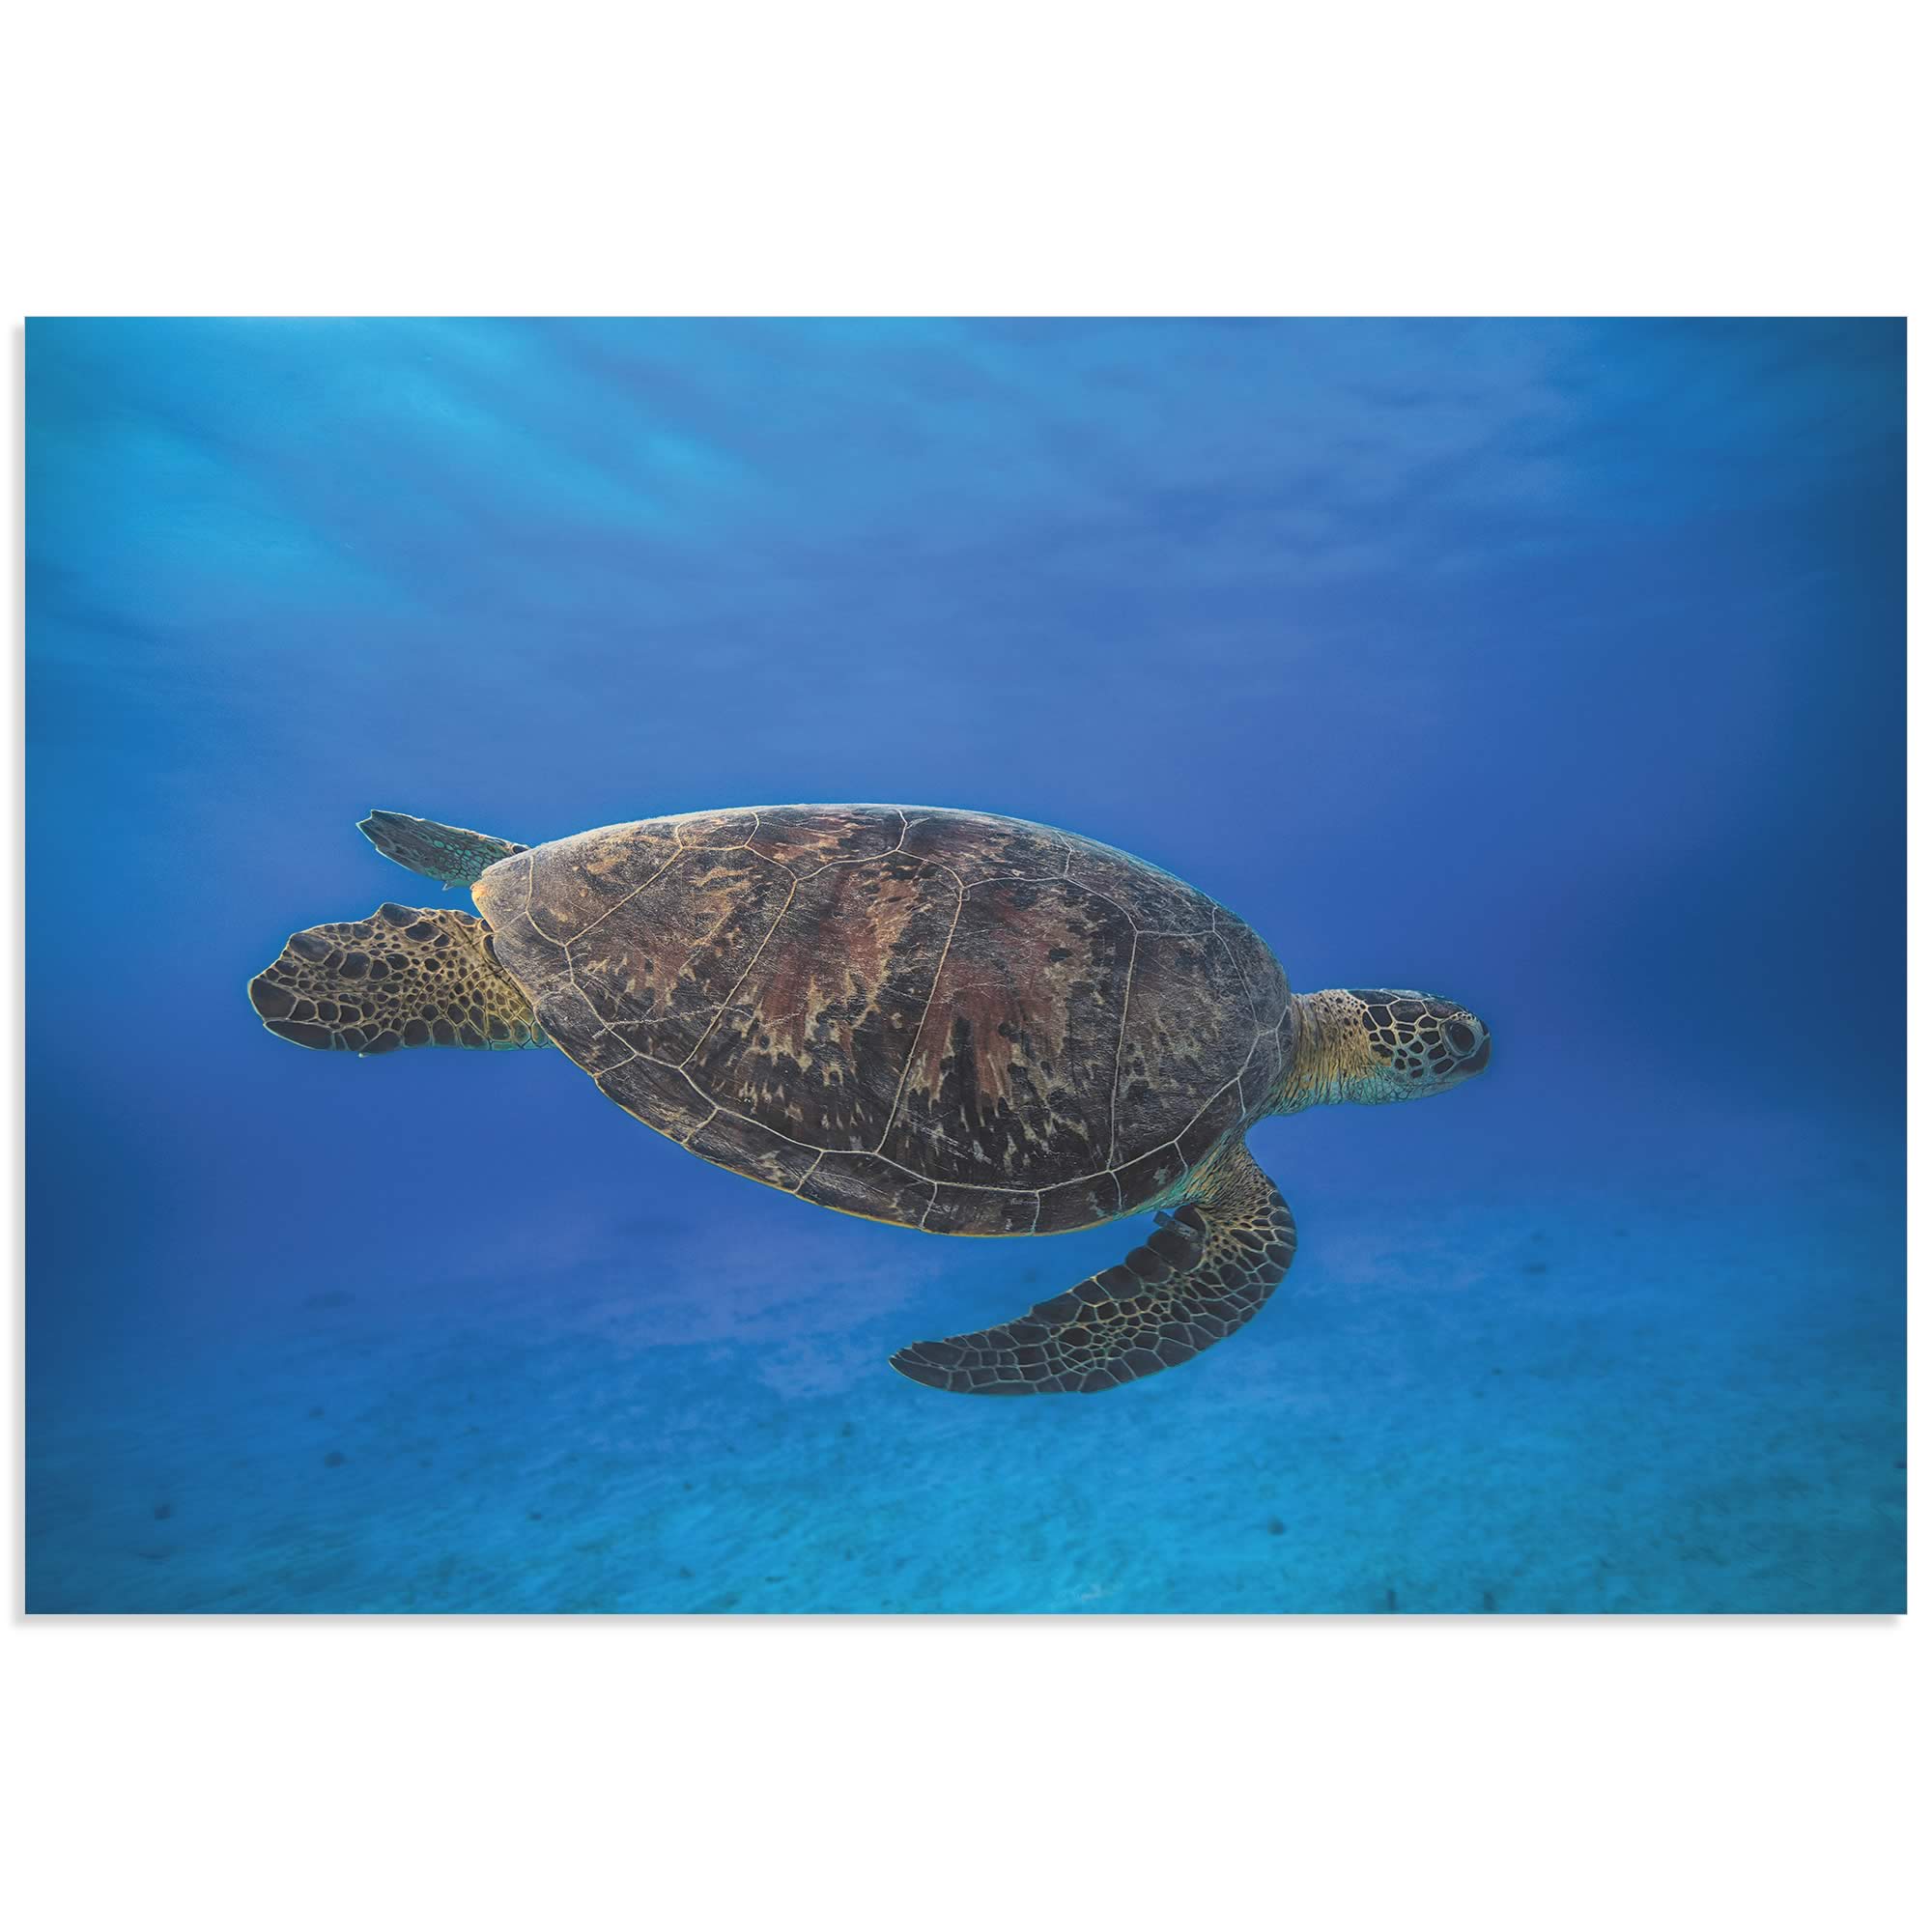 Green Turtle in the Blue by Barathieu Gabriel - Sea Turtle Art on Metal or Acrylic